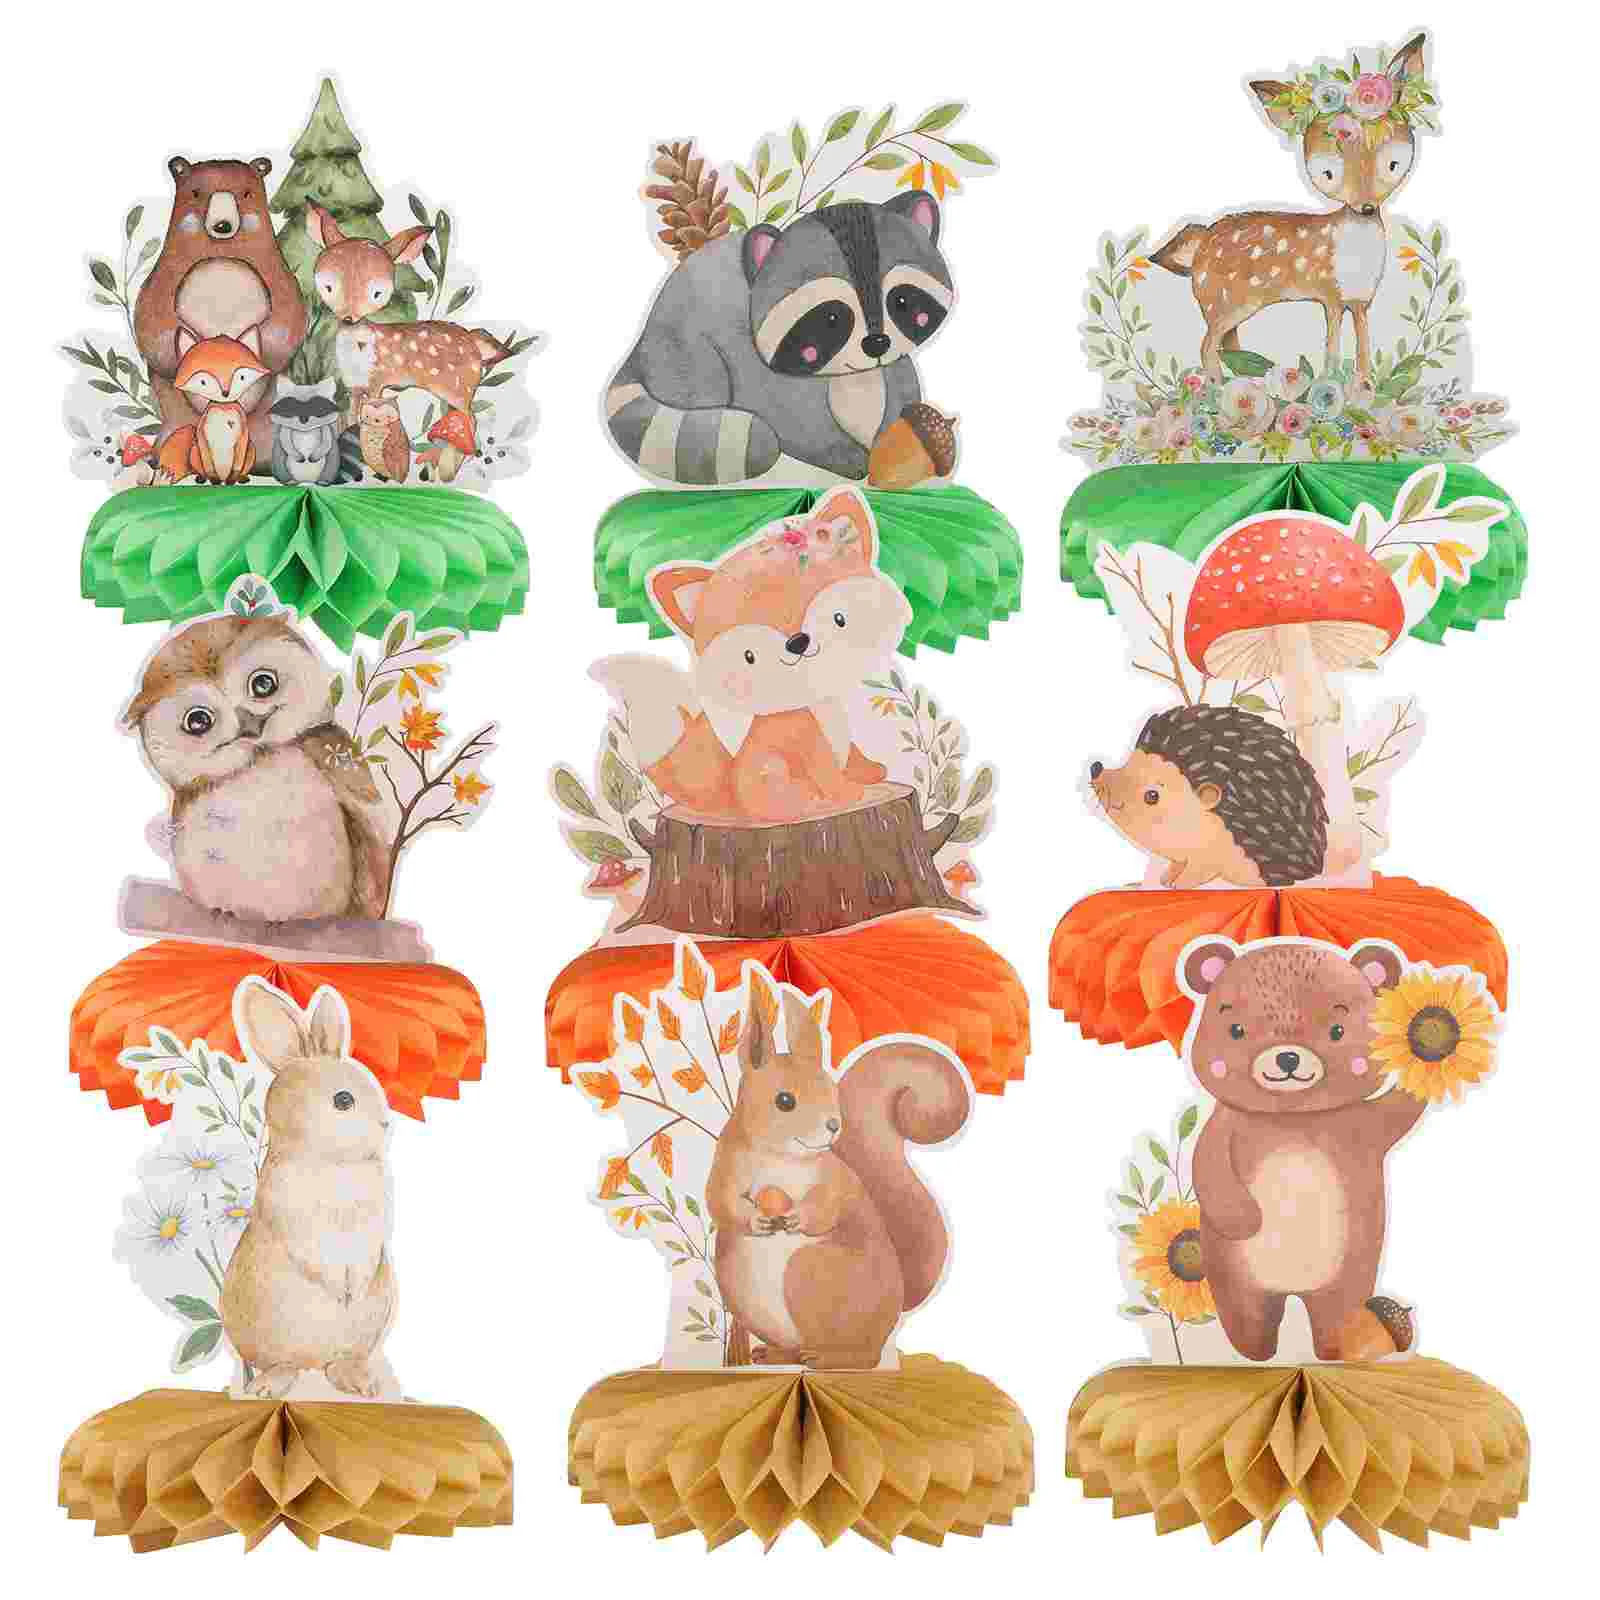 

9 Pcs Honeycomb Ornaments Woodland Birthday Decorations Baby Shower Girl Centerpieces Party 350g White Cardboard Animals